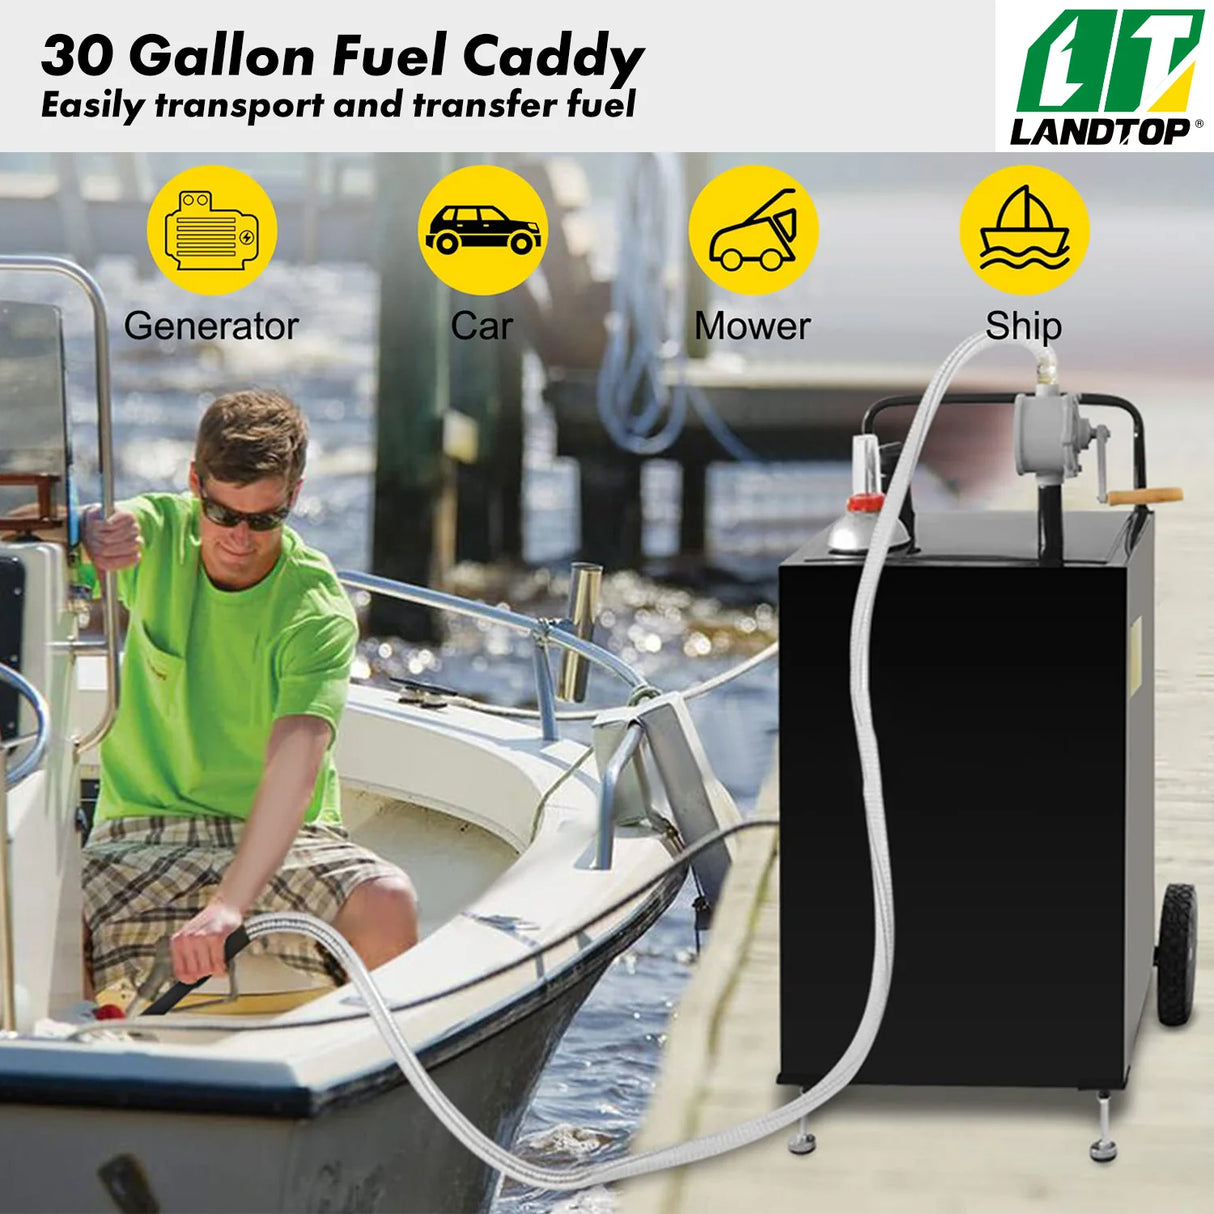 30 Gallon Fuel Caddy, Gas Storage Tank & 4 Wheels, with Manuel Transfer Pump, Gasoline Diesel Fuel Container for Cars, Lawn Mowers, ATVs, Boats, More, Black